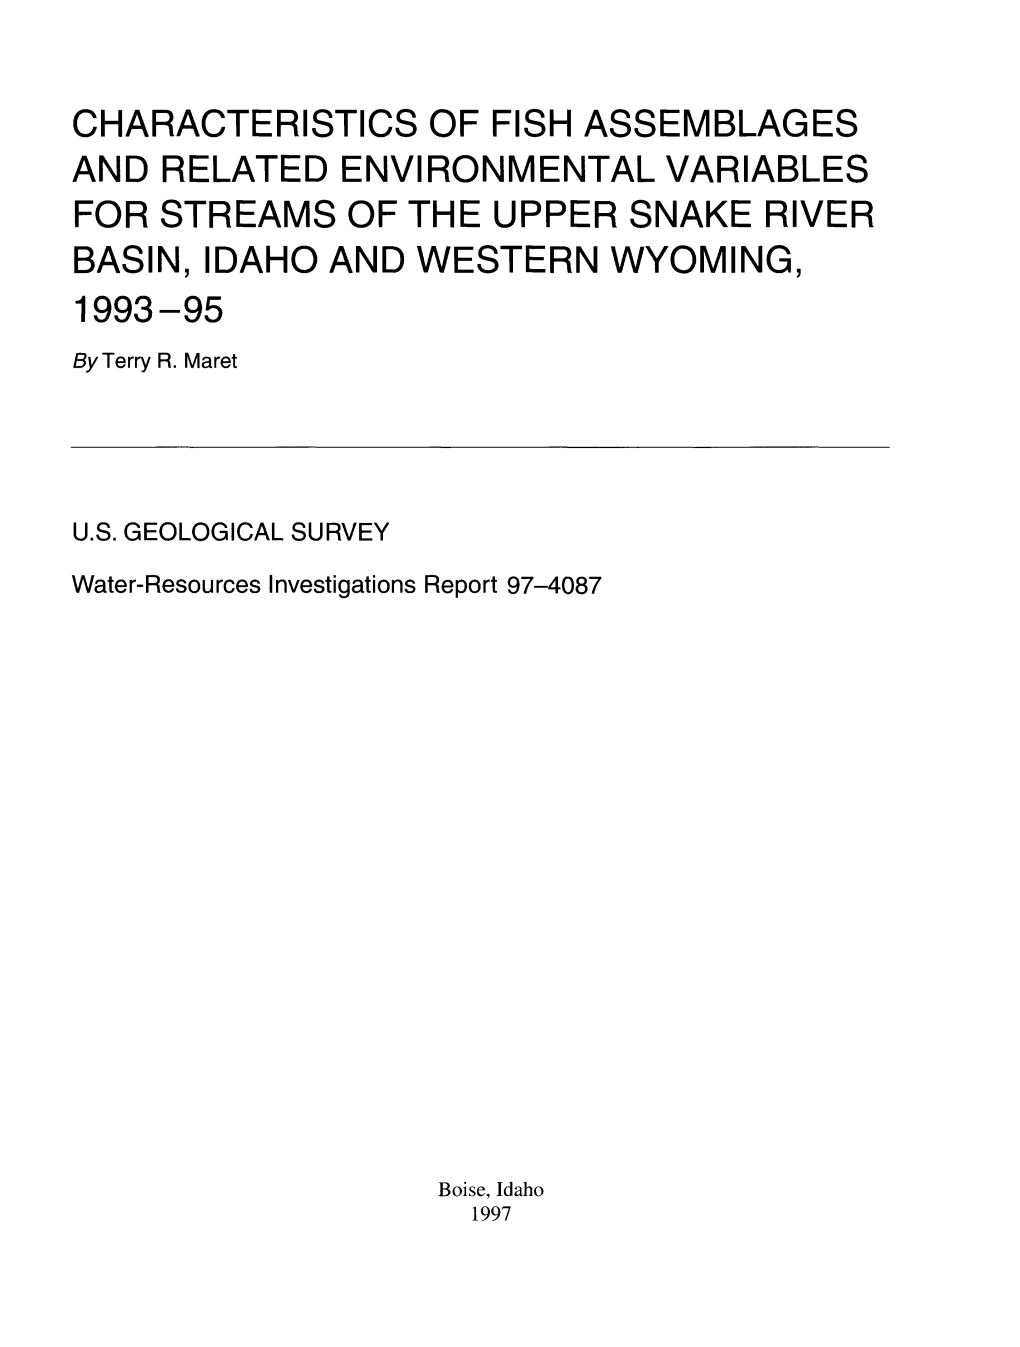 CHARACTERISTICS of FISH ASSEMBLAGES and RELATED ENVIRONMENTAL VARIABLES for STREAMS of the UPPER SNAKE RIVER BASIN, IDAHO and WESTERN WYOMING, 1993-95 by Terry R